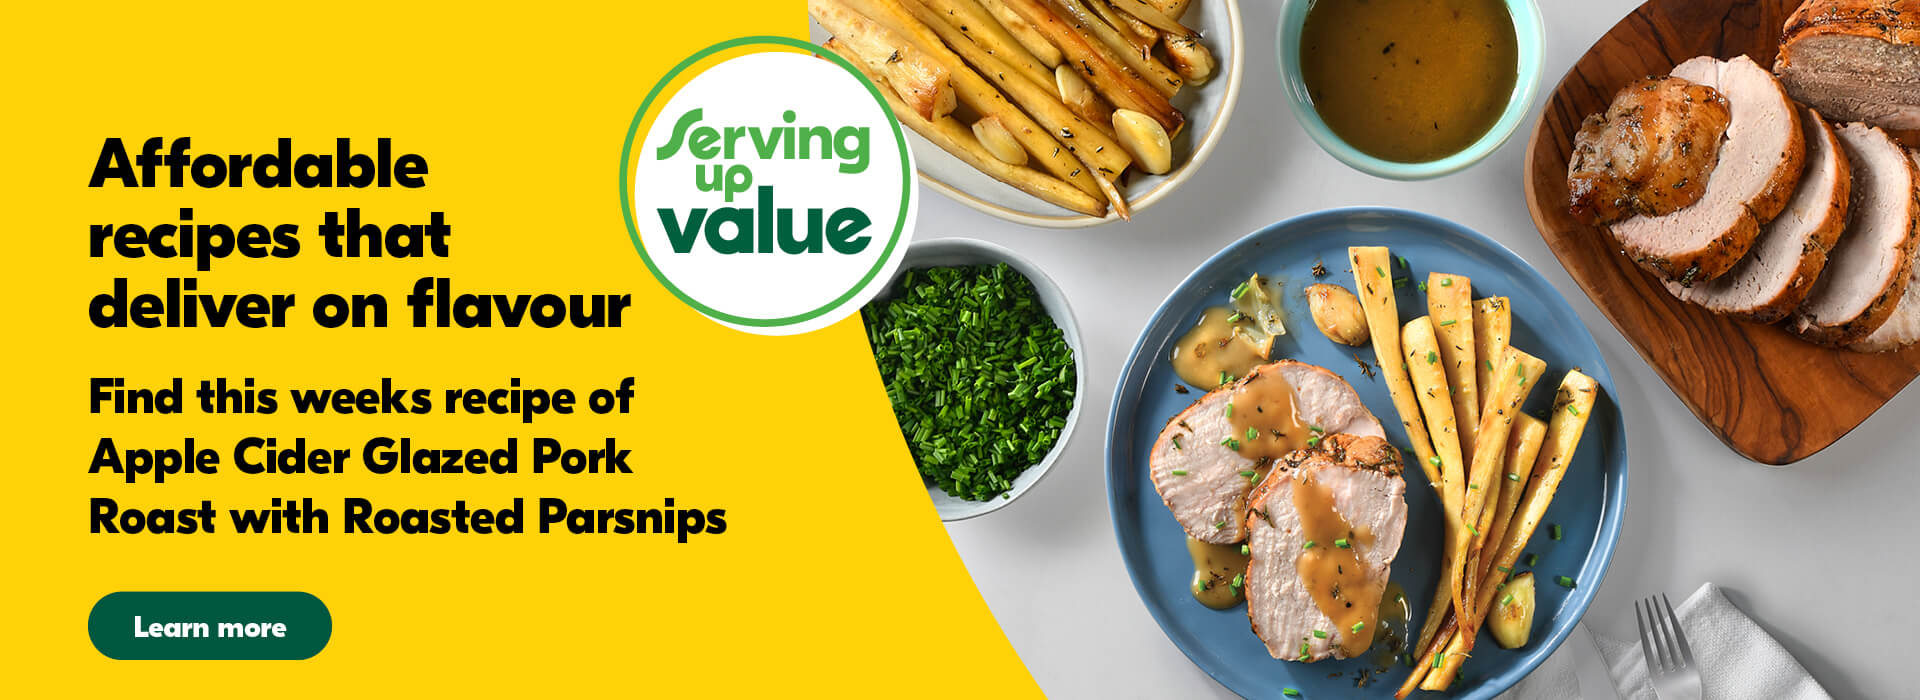 Serving up Value; Affordable Recipes that deliver on flavour. Find this week's recipe of Apple Cider Glazed Pork Roast with Roasted Parsnips Plate with sliced pork roast dressed with pan drippings with a side of roasted parsnips. Surrounded by a small bowl with sauce, a bowl with diced chives, a bowl with roasted parsnips and a plate with sliced pork roast.